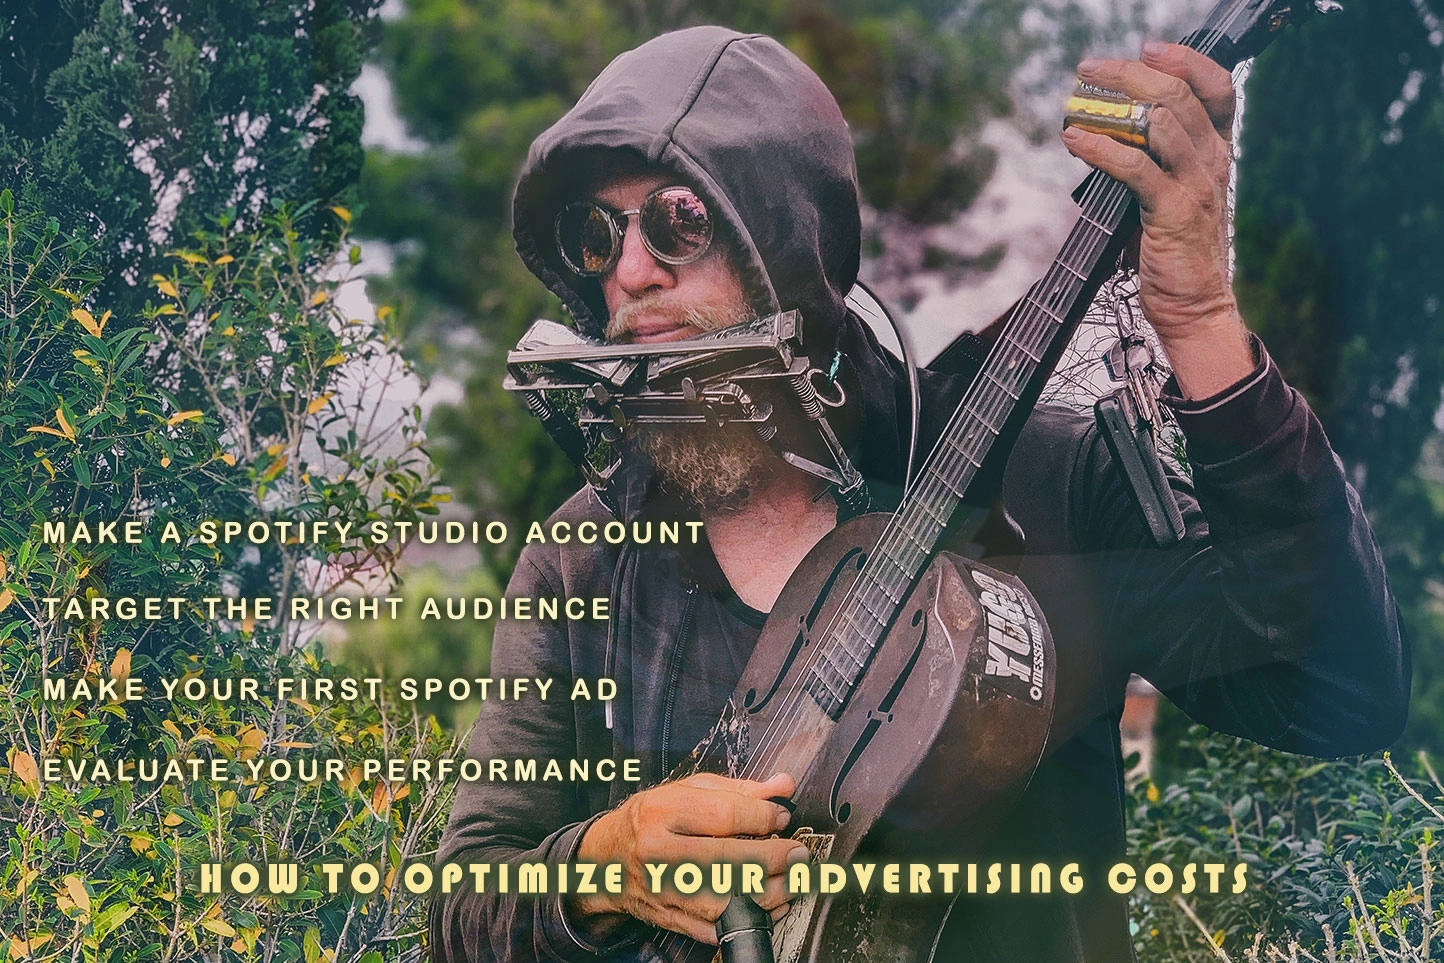 image-with-tips-to-optimize-spotify--advertising-costs